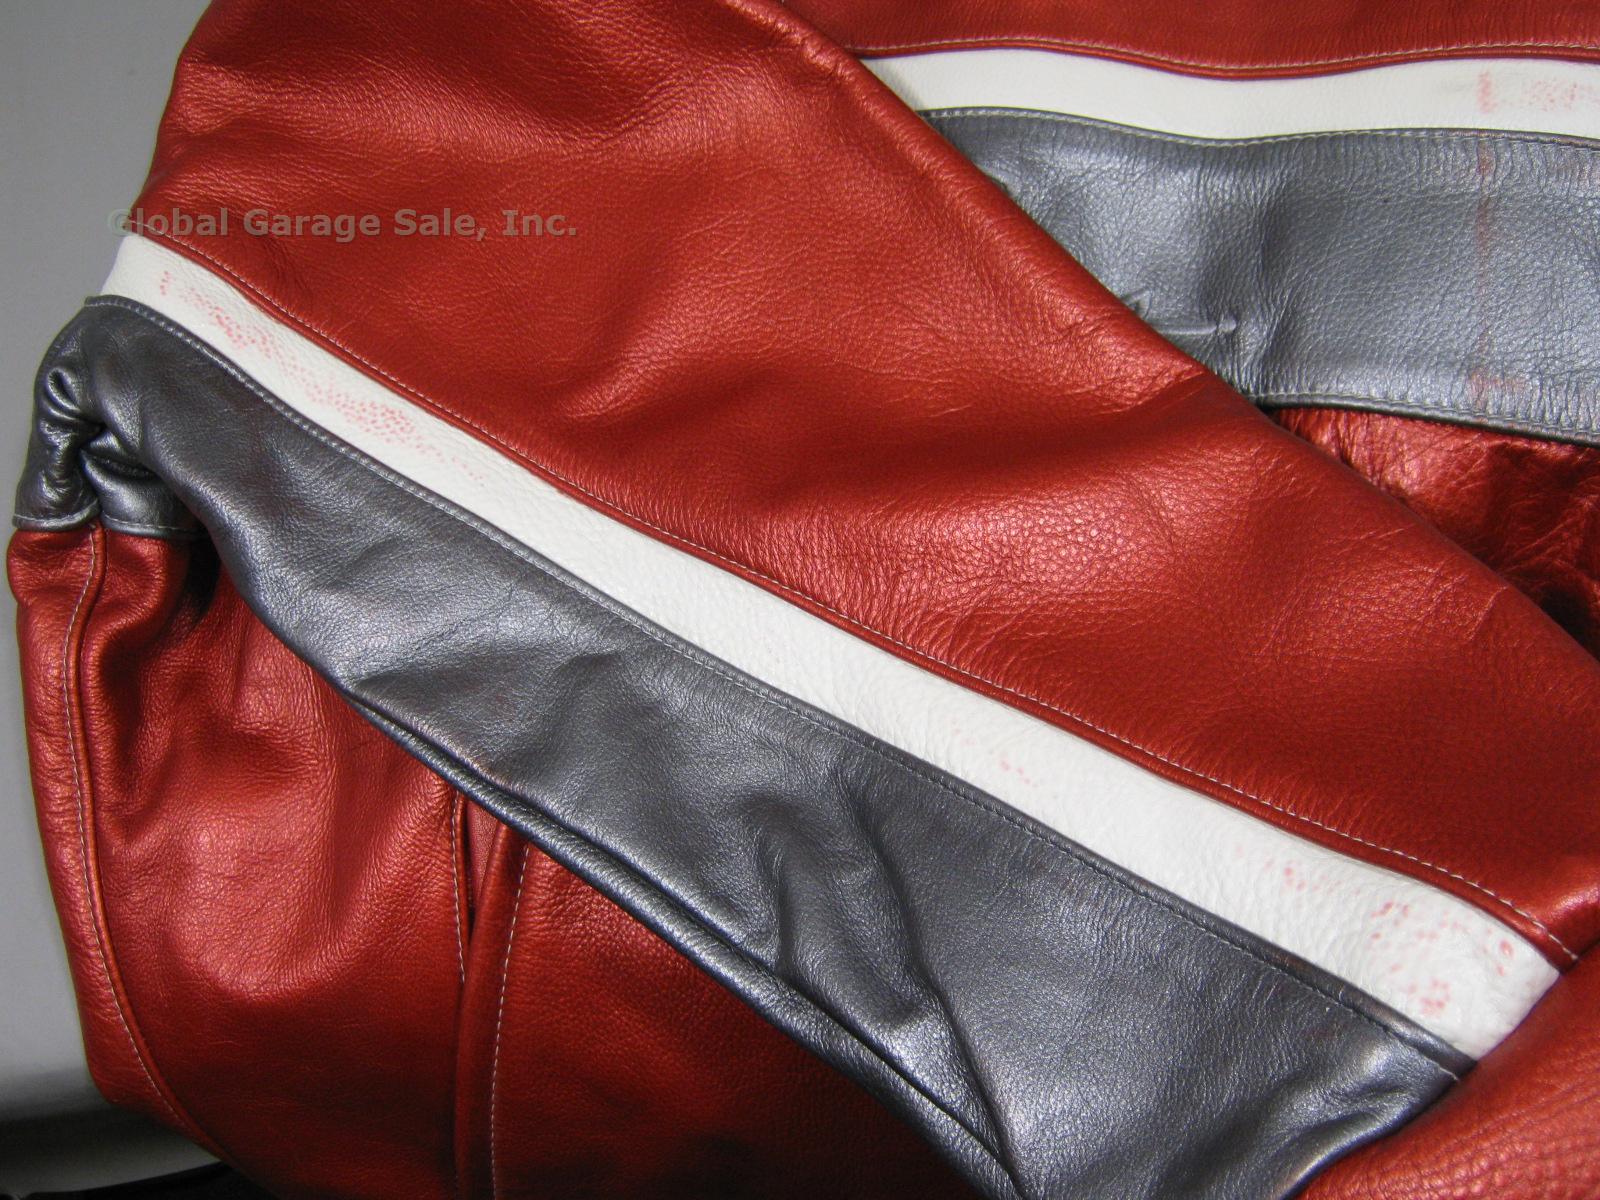 New Mens Schott MCMXIII 1913 Red Silver White Leather Motorcycle Jacket XXL 2XL 3